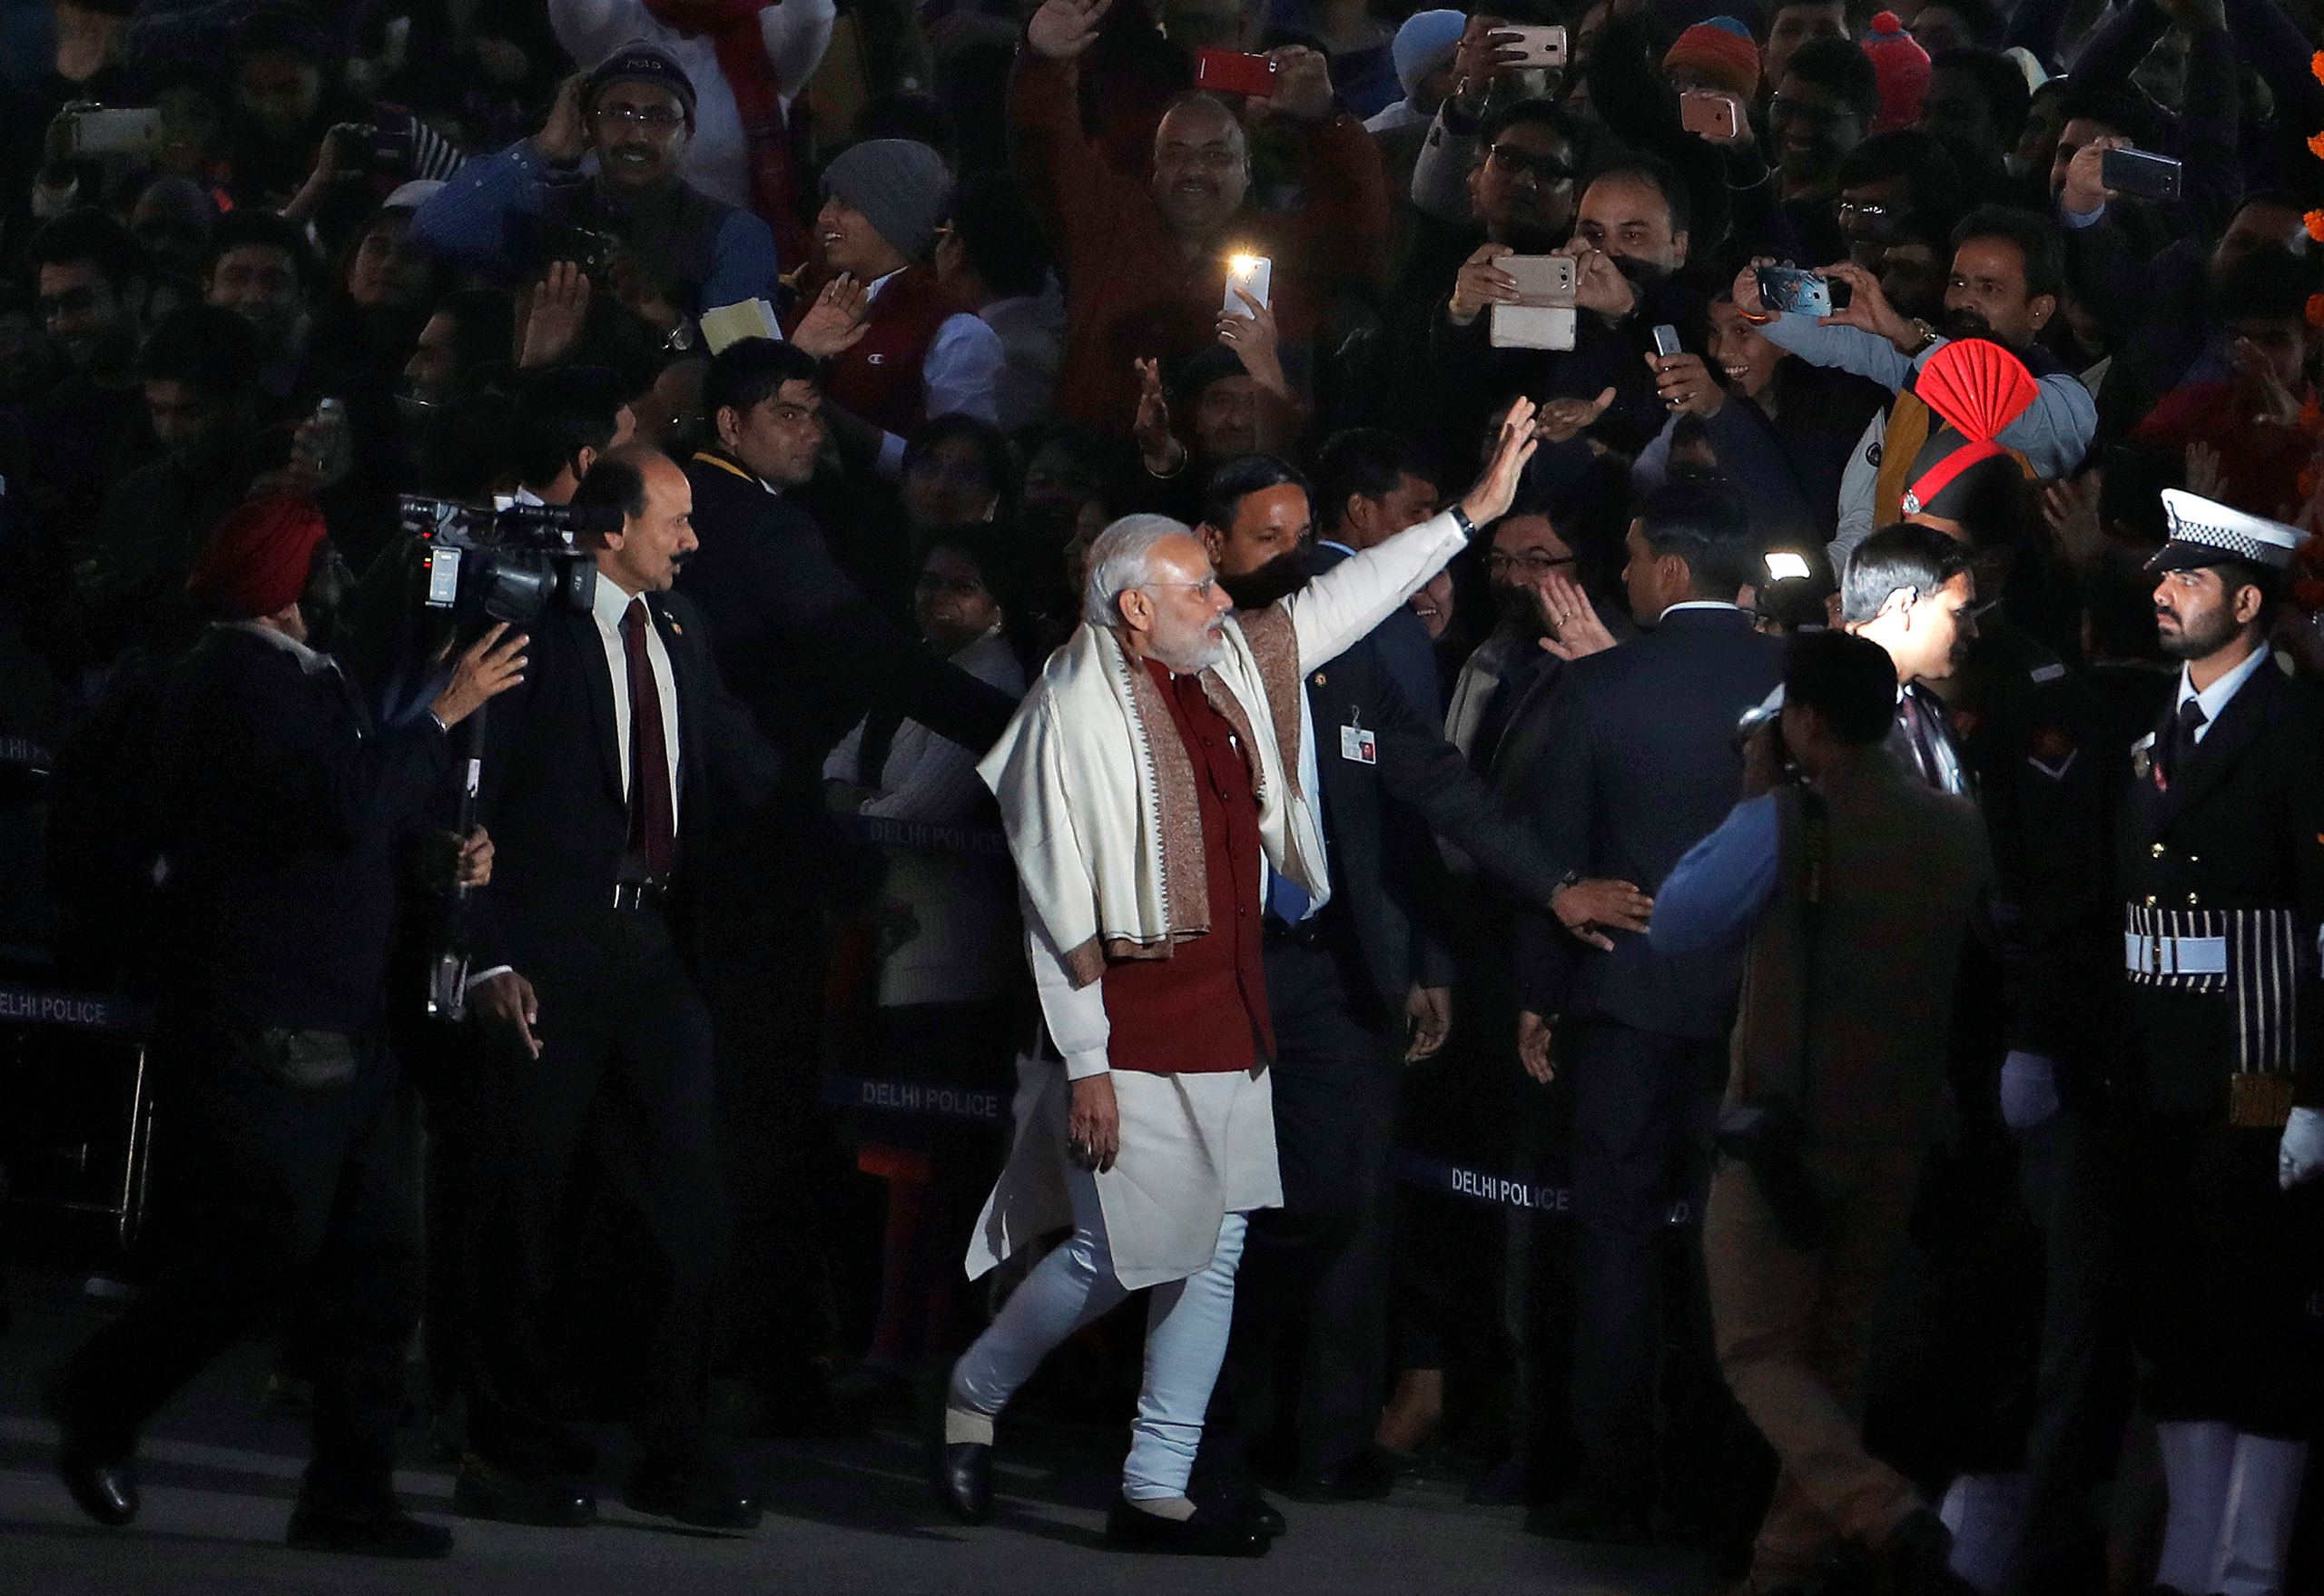 India's Prime Minister Narendra Modi waves as he leaves the Beating the Retreat ceremony in New Delhi on Jan. 29, 2017. (Cathal McNaughton—Reuters)